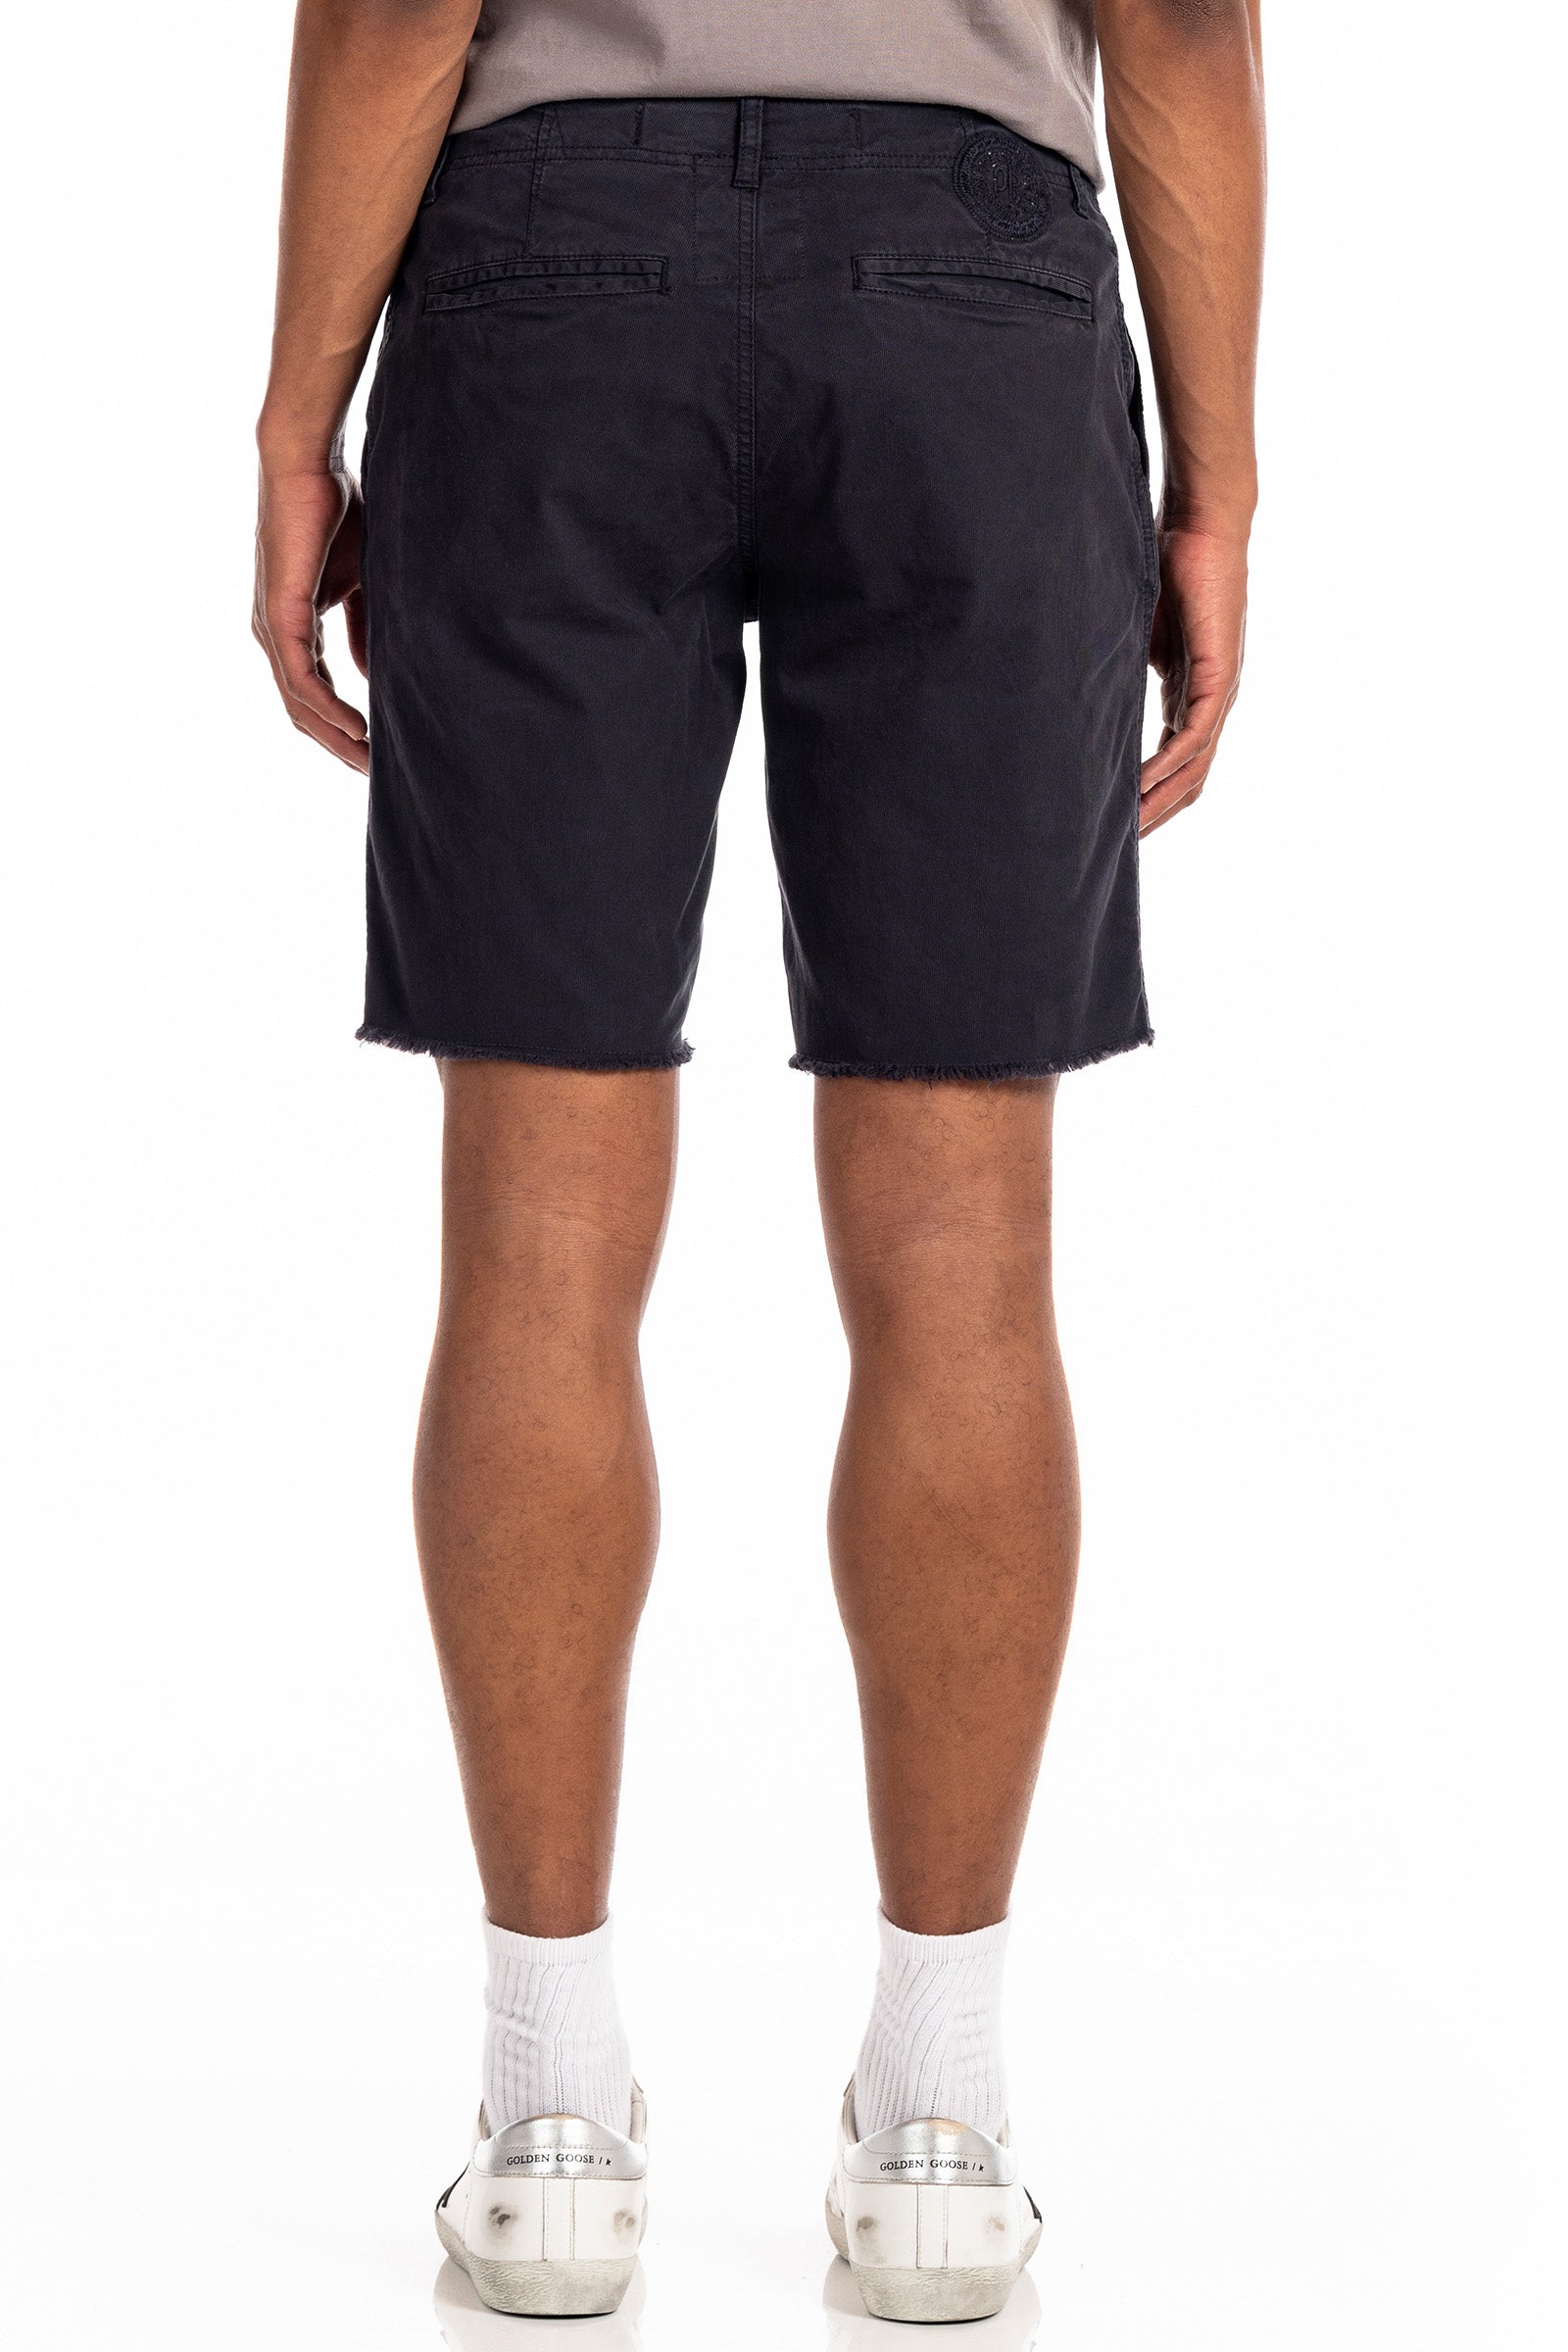 Original Paperbacks Brentwood Chino Short in Washed Black on Model Cropped Back View